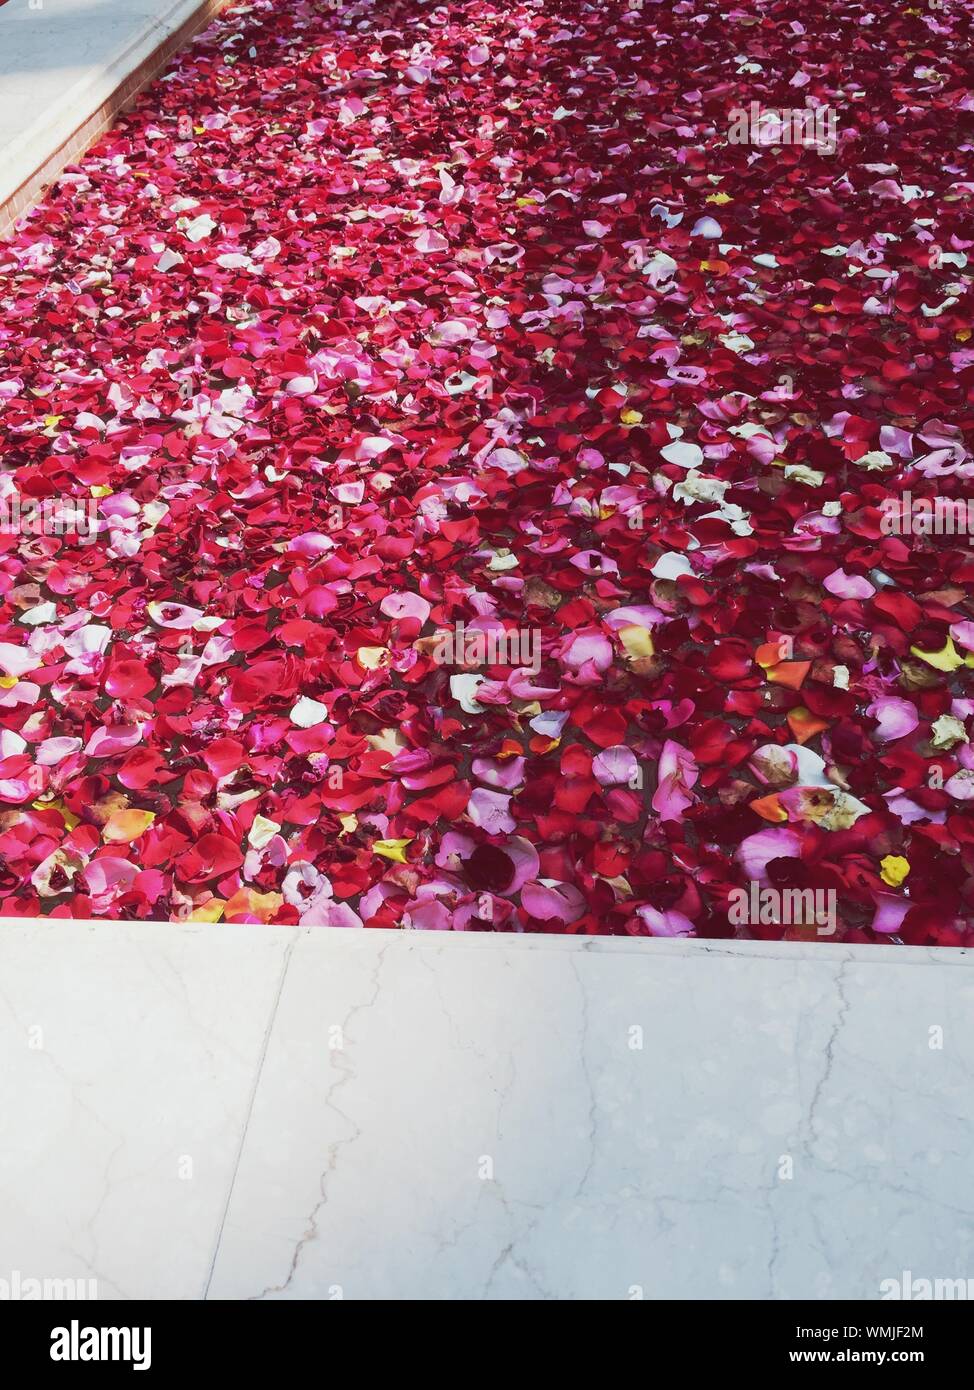 High Angle View Of Red Rose Petals In Swimming Pool Stock Photo - Alamy